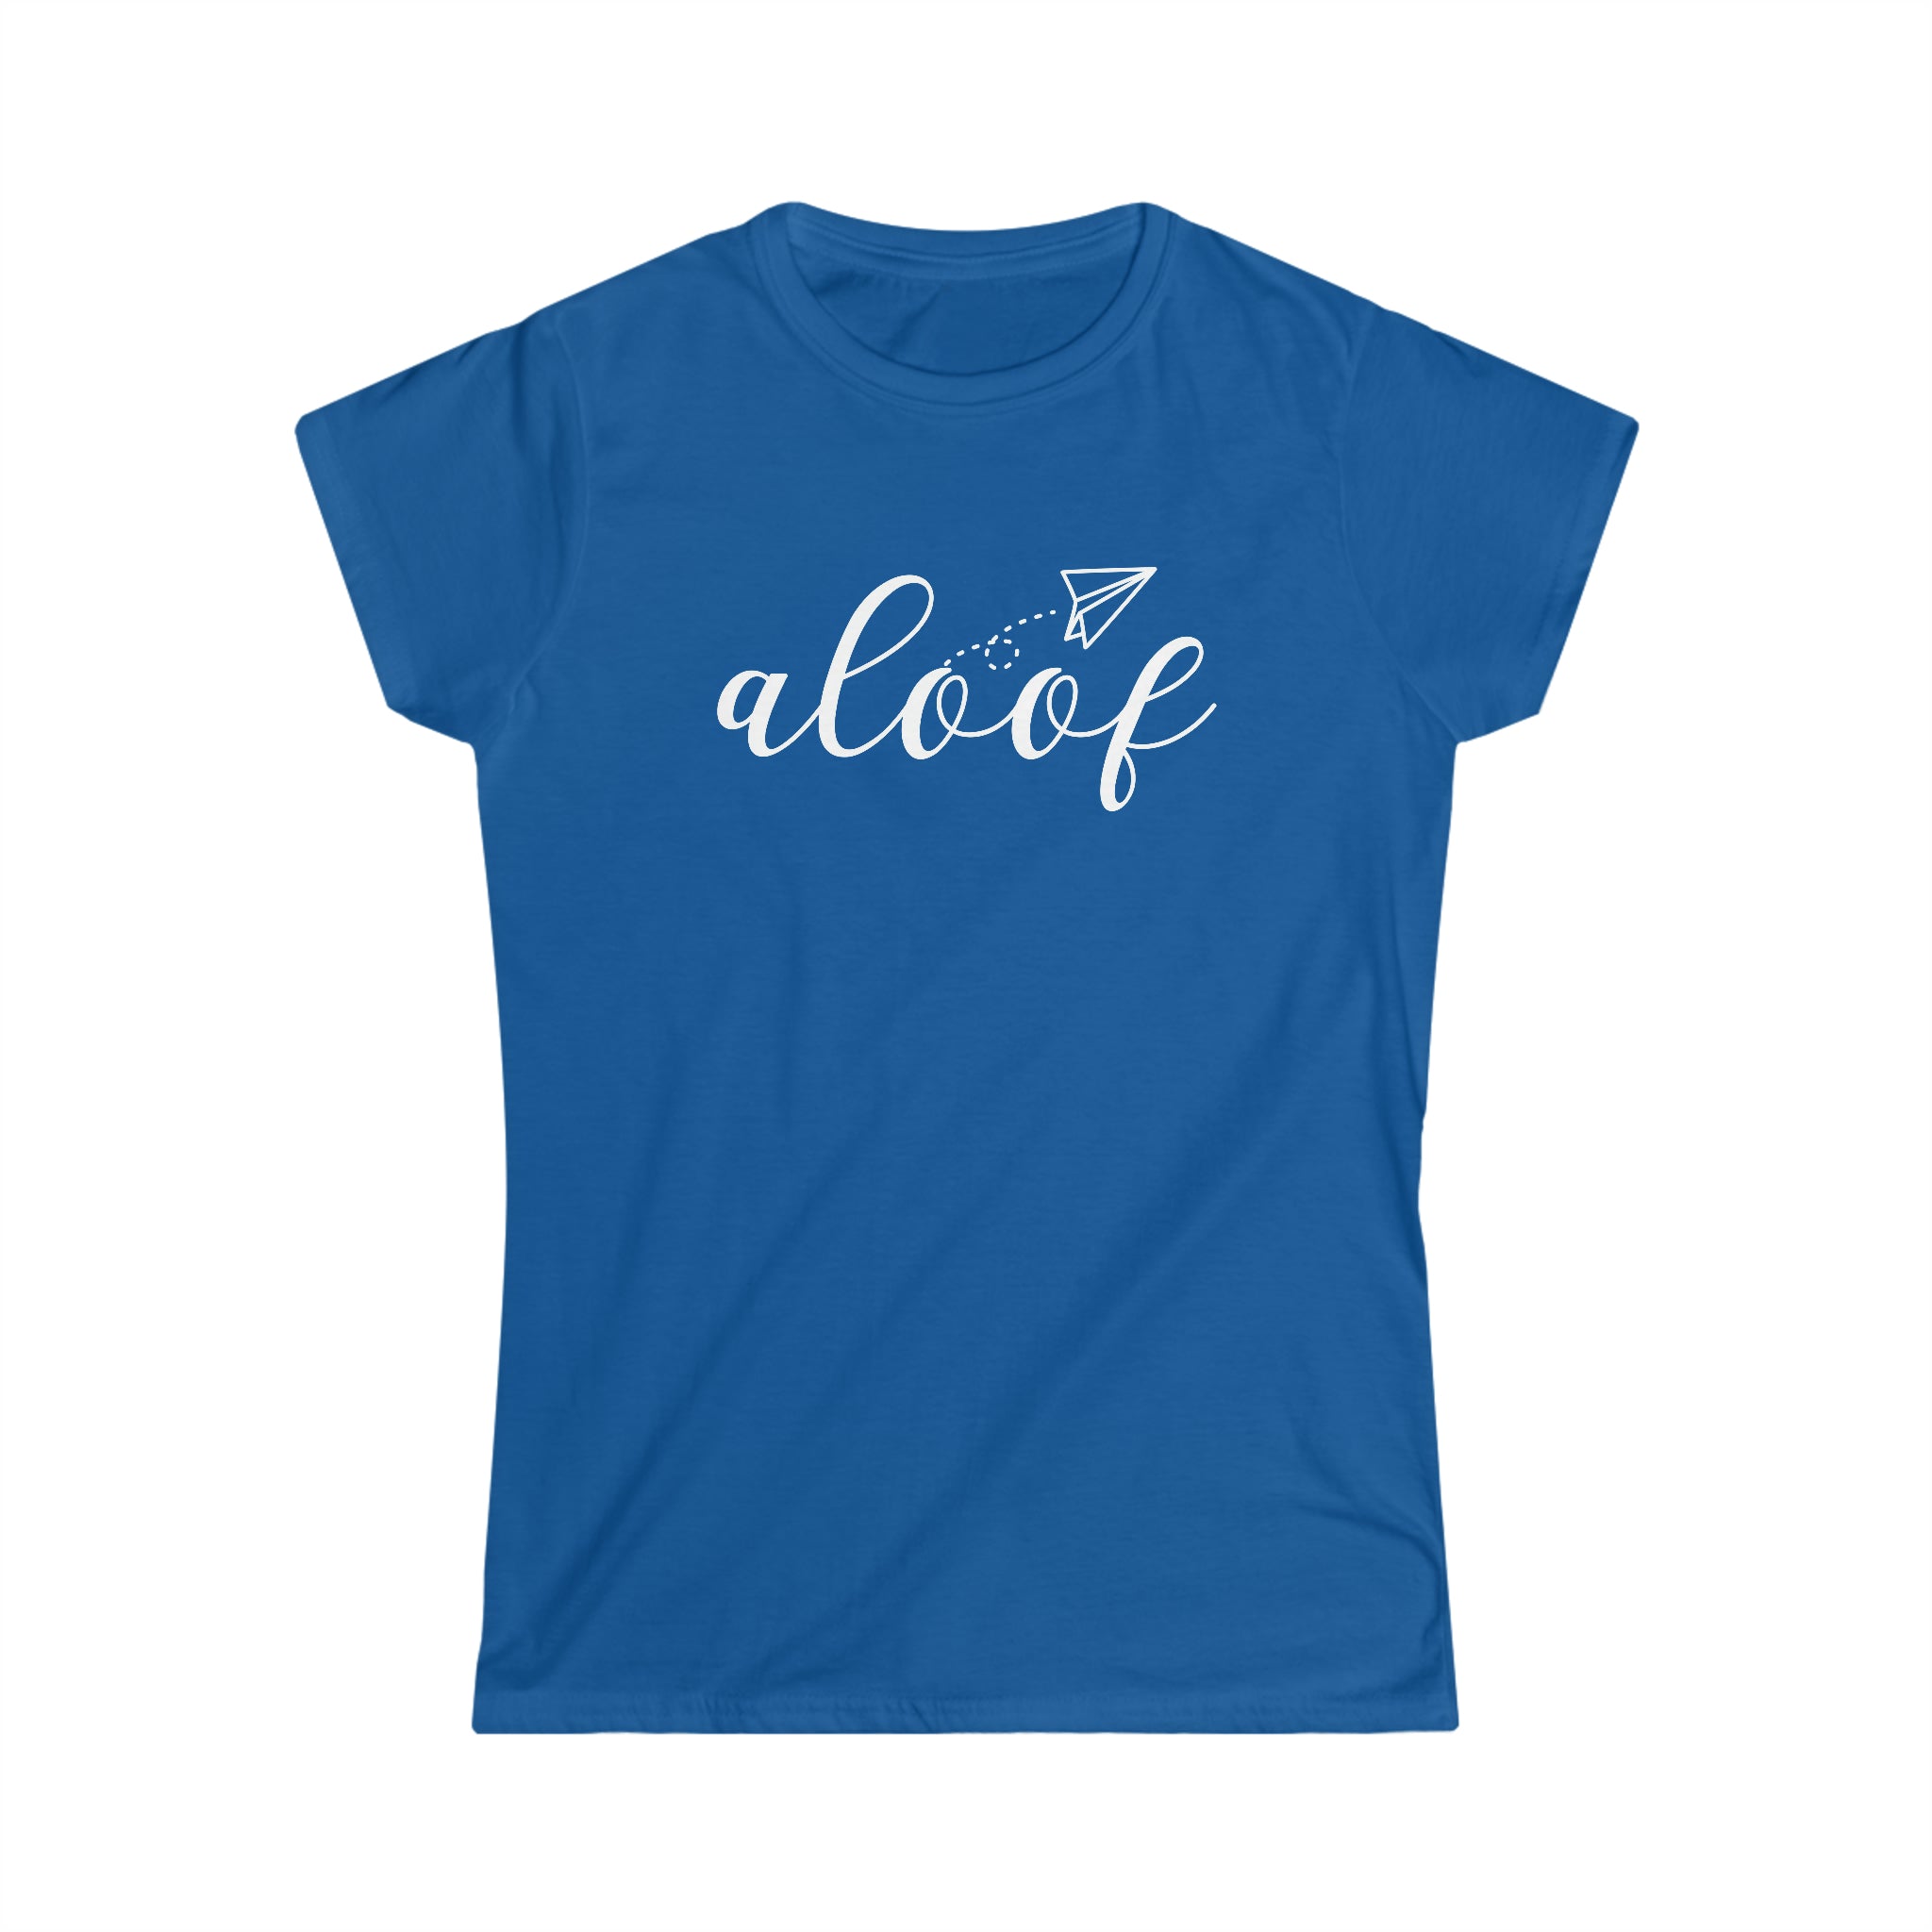  ALOOF Empowerment Women's Softstyle Tee, Sarcastic Ladies Shirt, Sarcastic T-Shirt, Funny Fitted Tshirt T-ShirtRoyal2XL